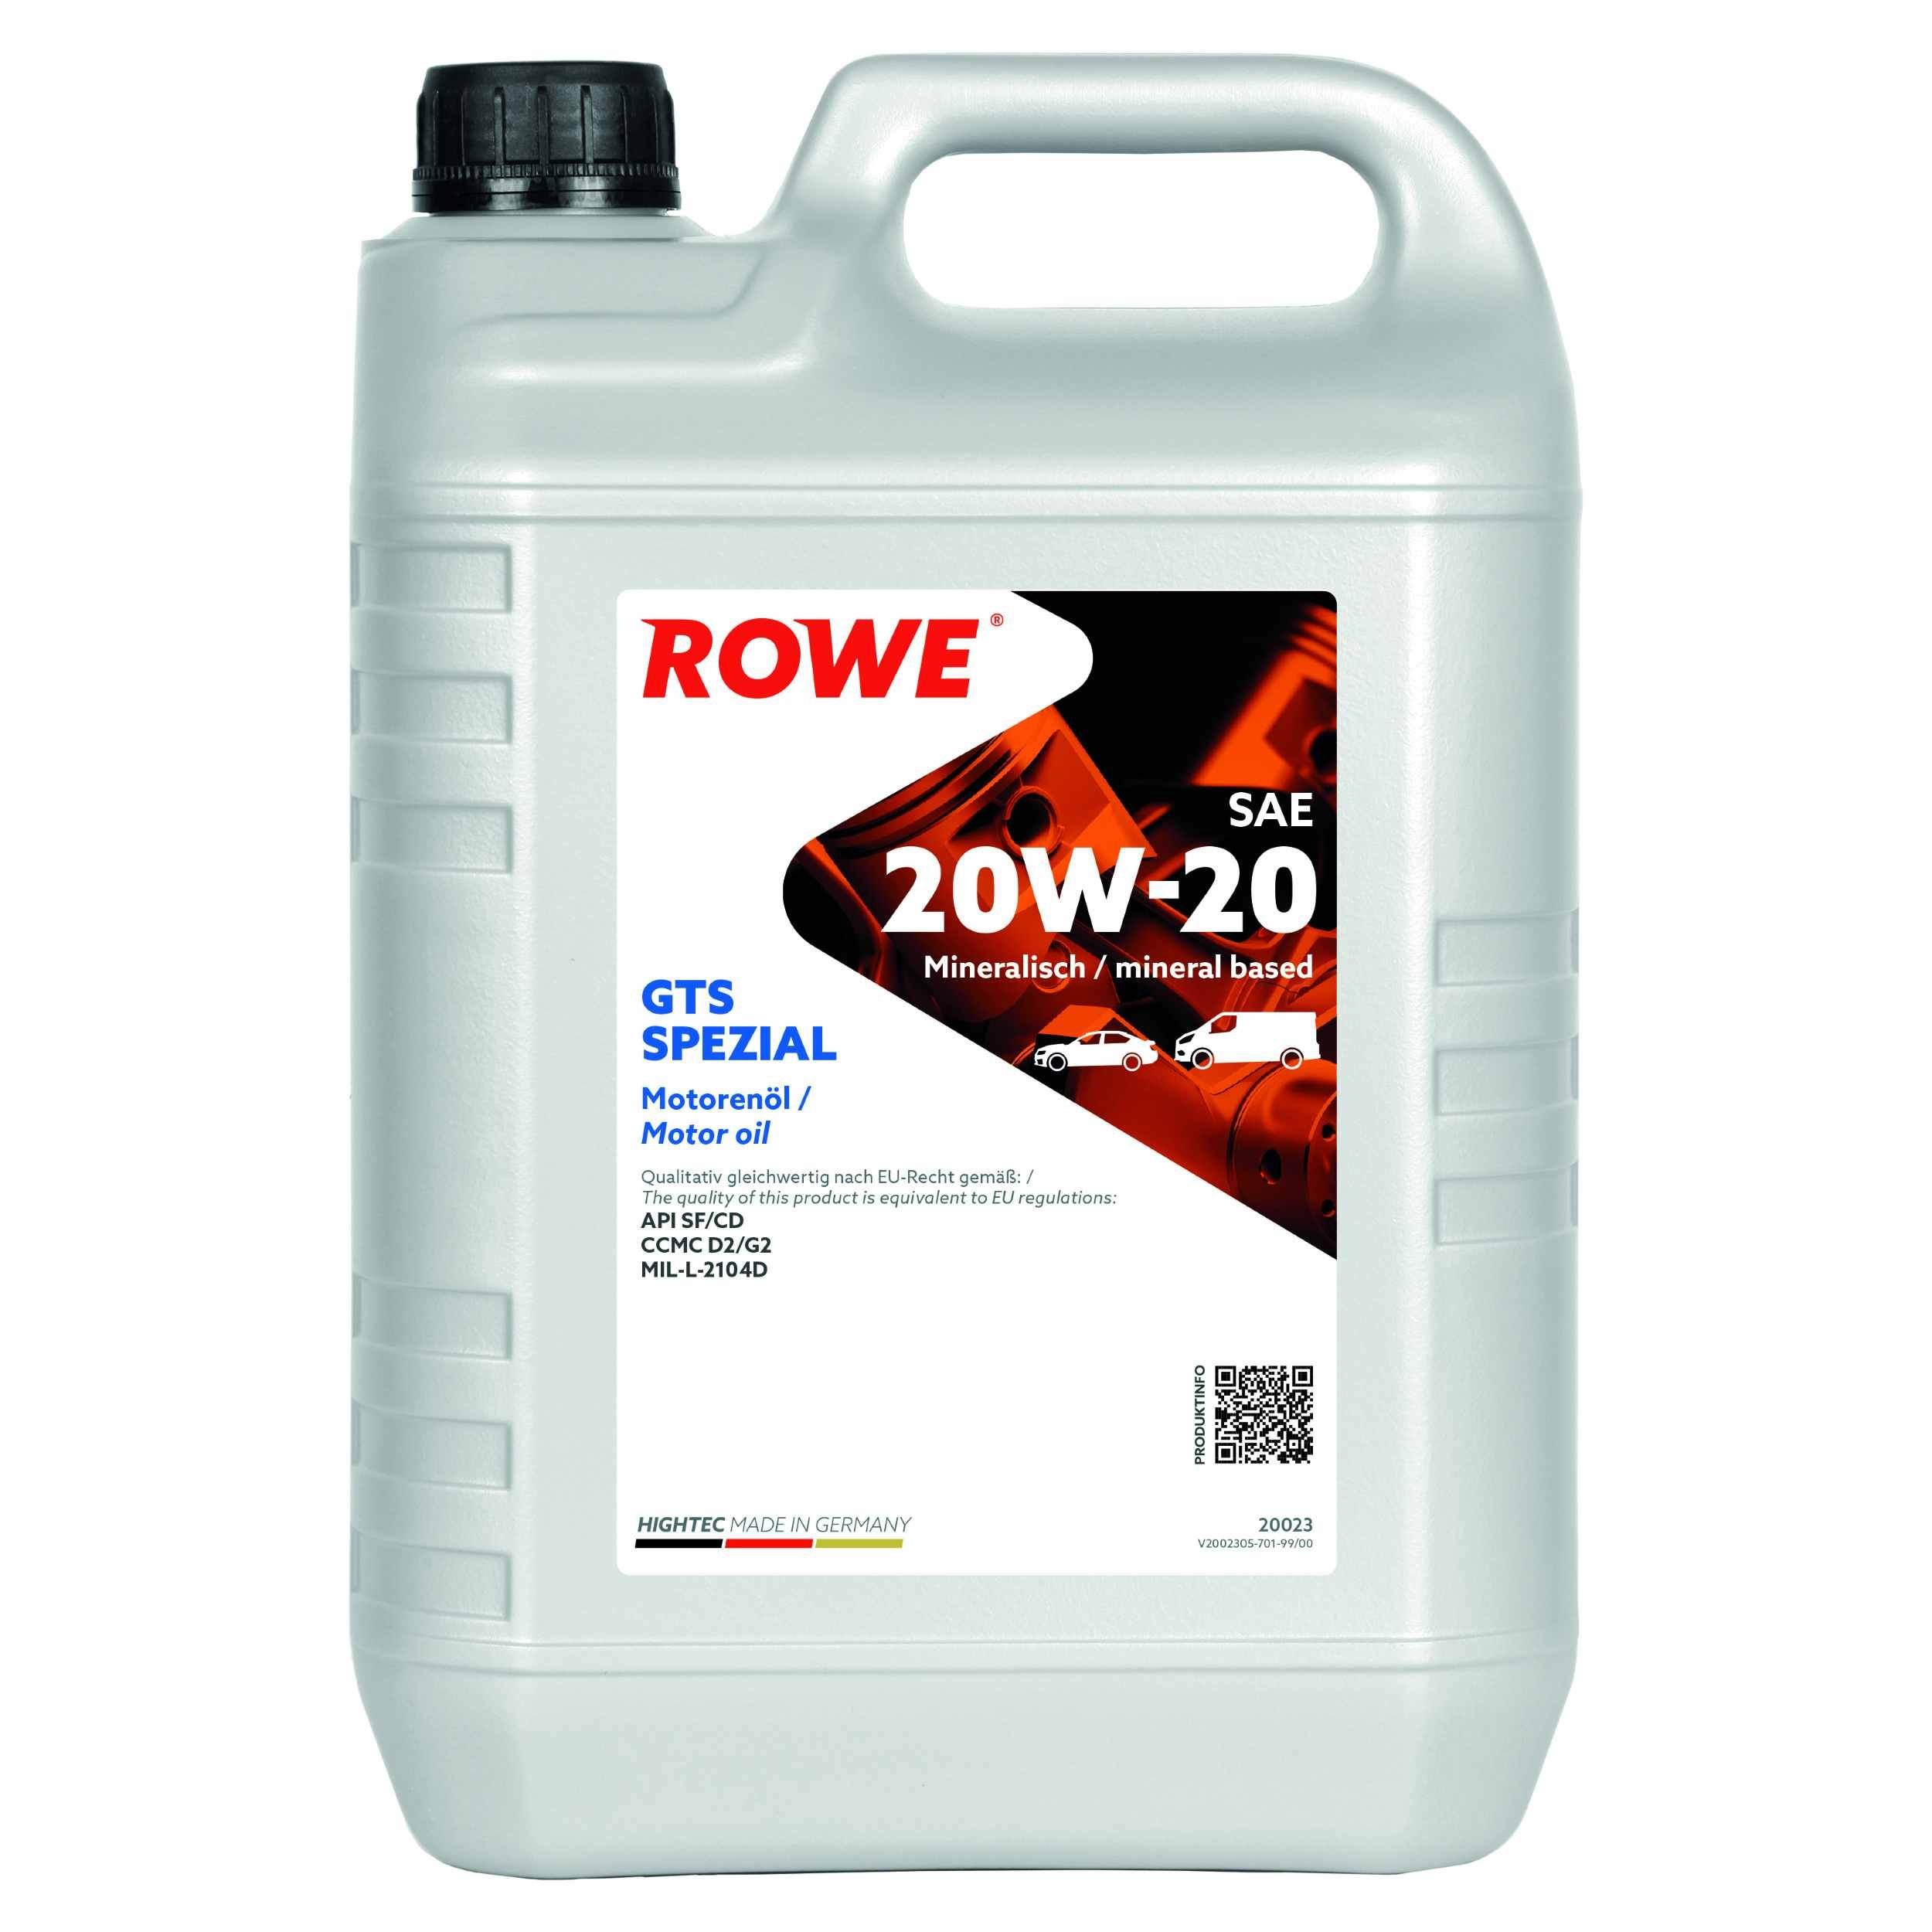 Engine oil ROWE 20W-20, 5l, Mineral Oil longlife 20023-0050-99